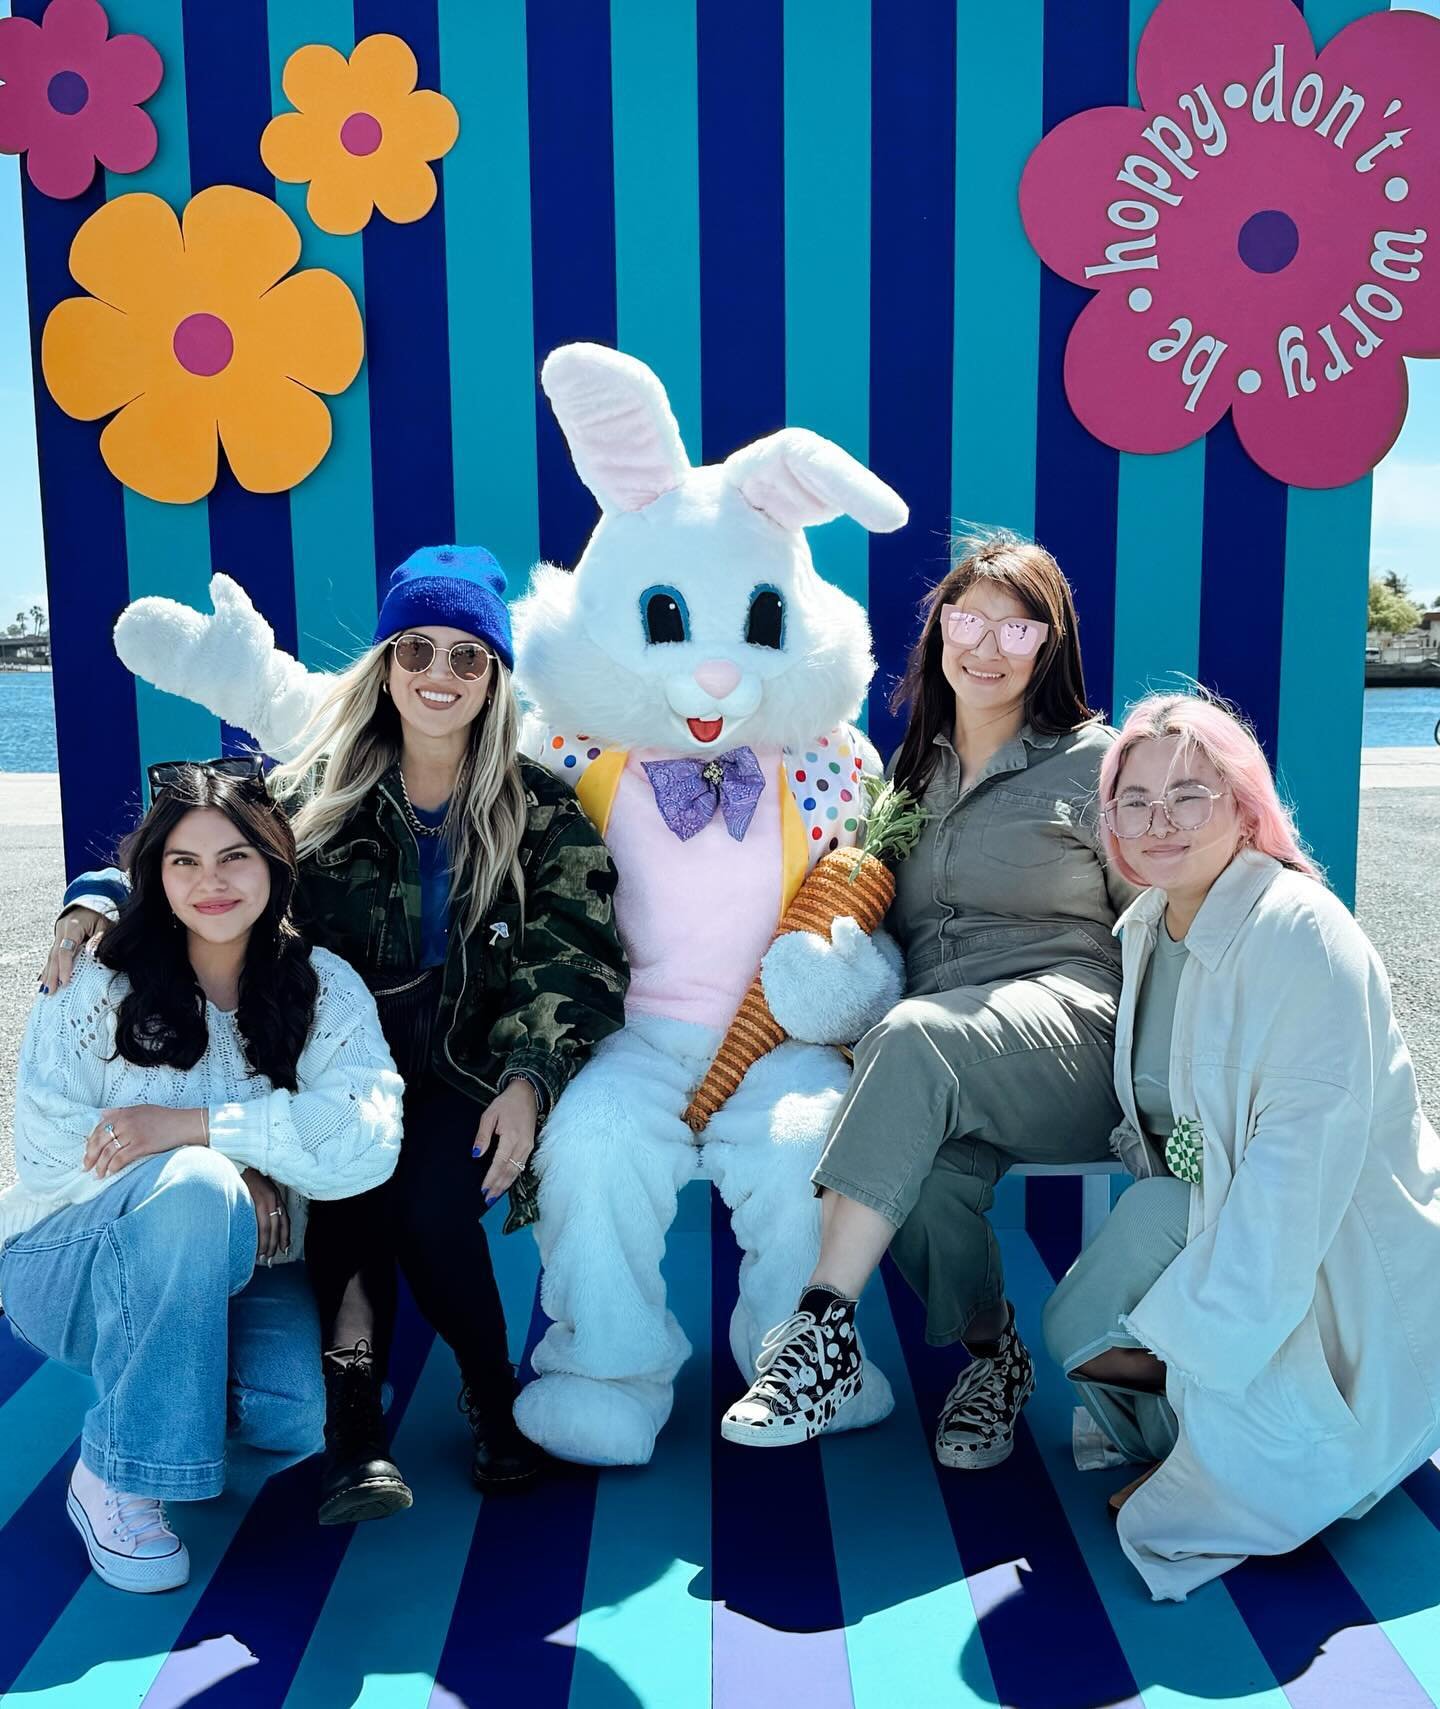 Wishing YOU a HOPPY Easter 🐰 
Love, The CC Crew 🖤